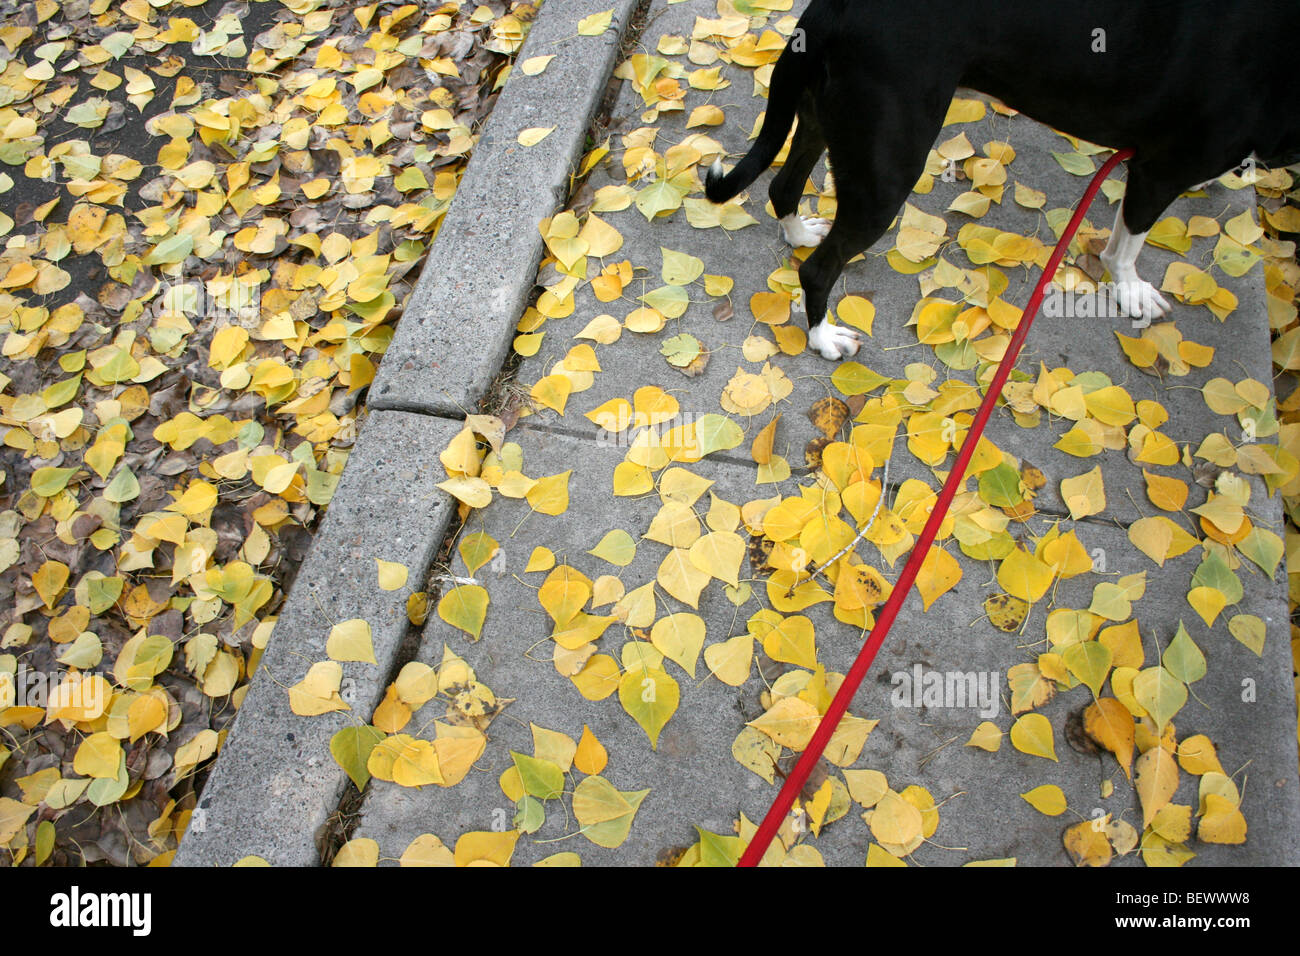 a dog on a leash standing on yellow cottonwood leaves, sidewalk Stock Photo